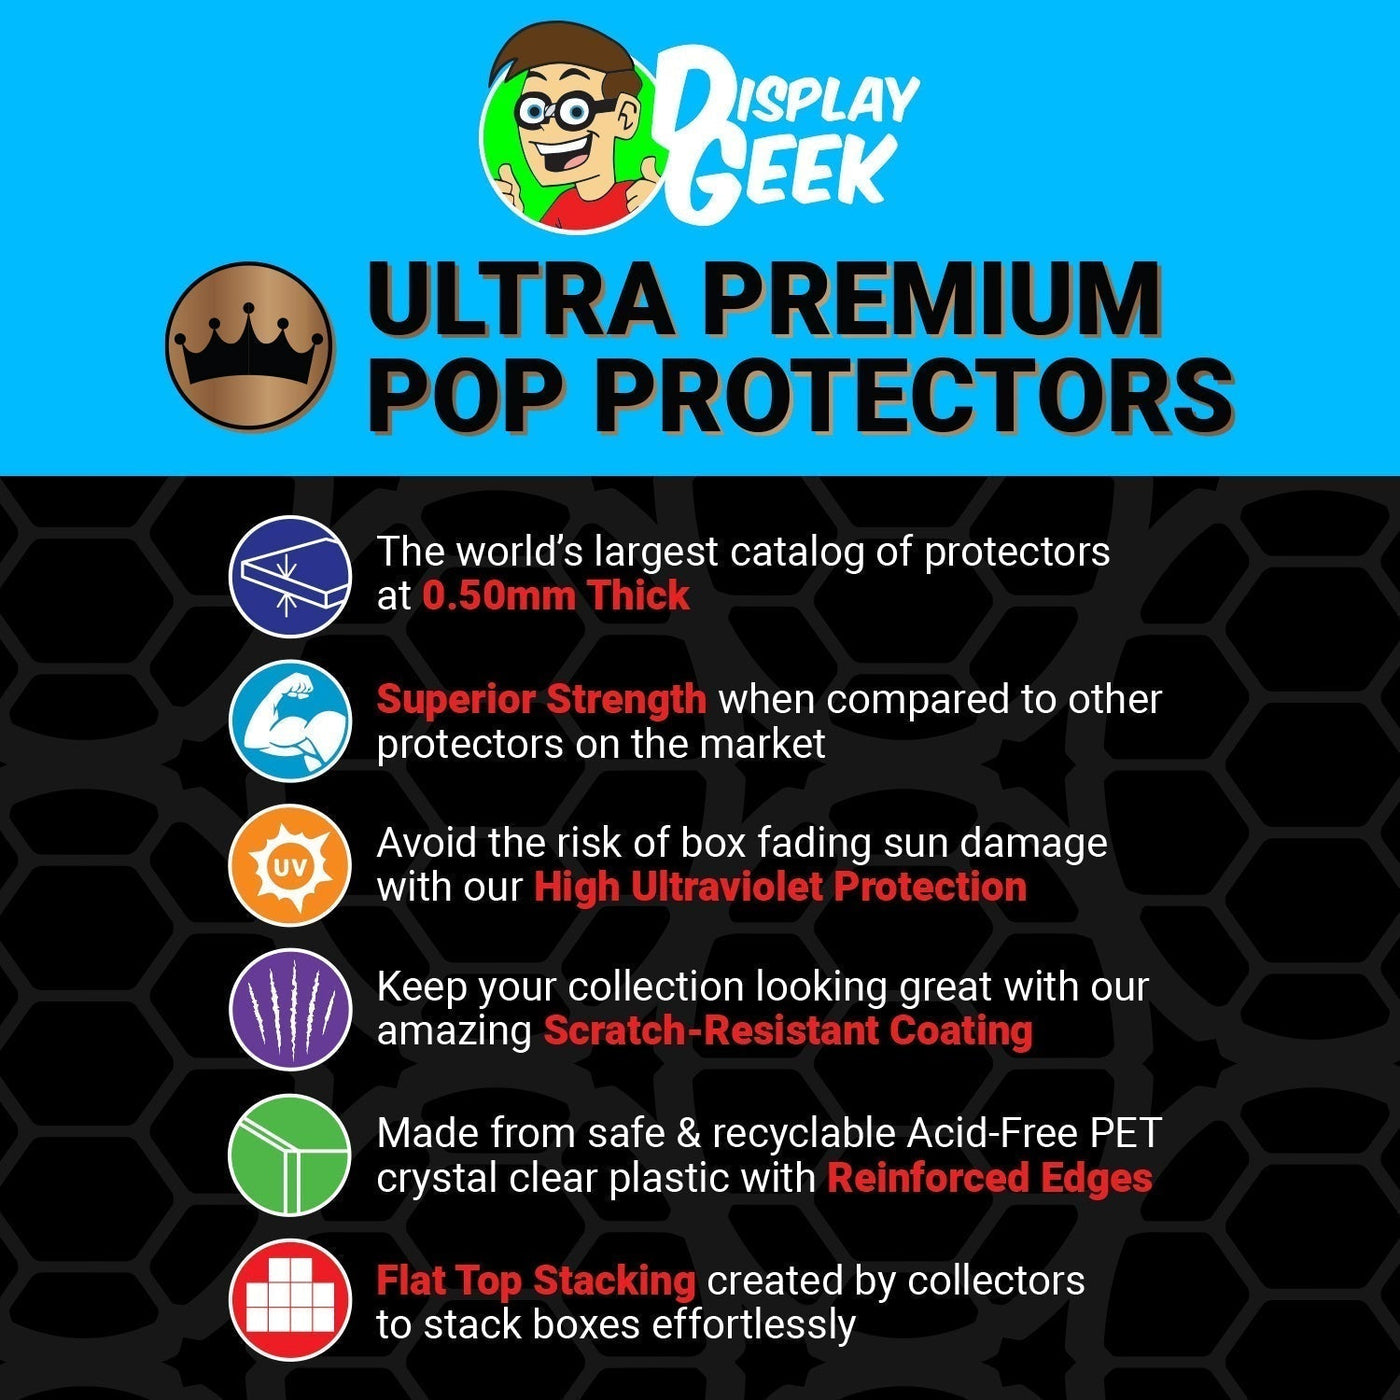 Pop Protector for Dolly Parton Backwoods Barbie #29 Funko Pop Albums on The Protector Guide App by Display Geek